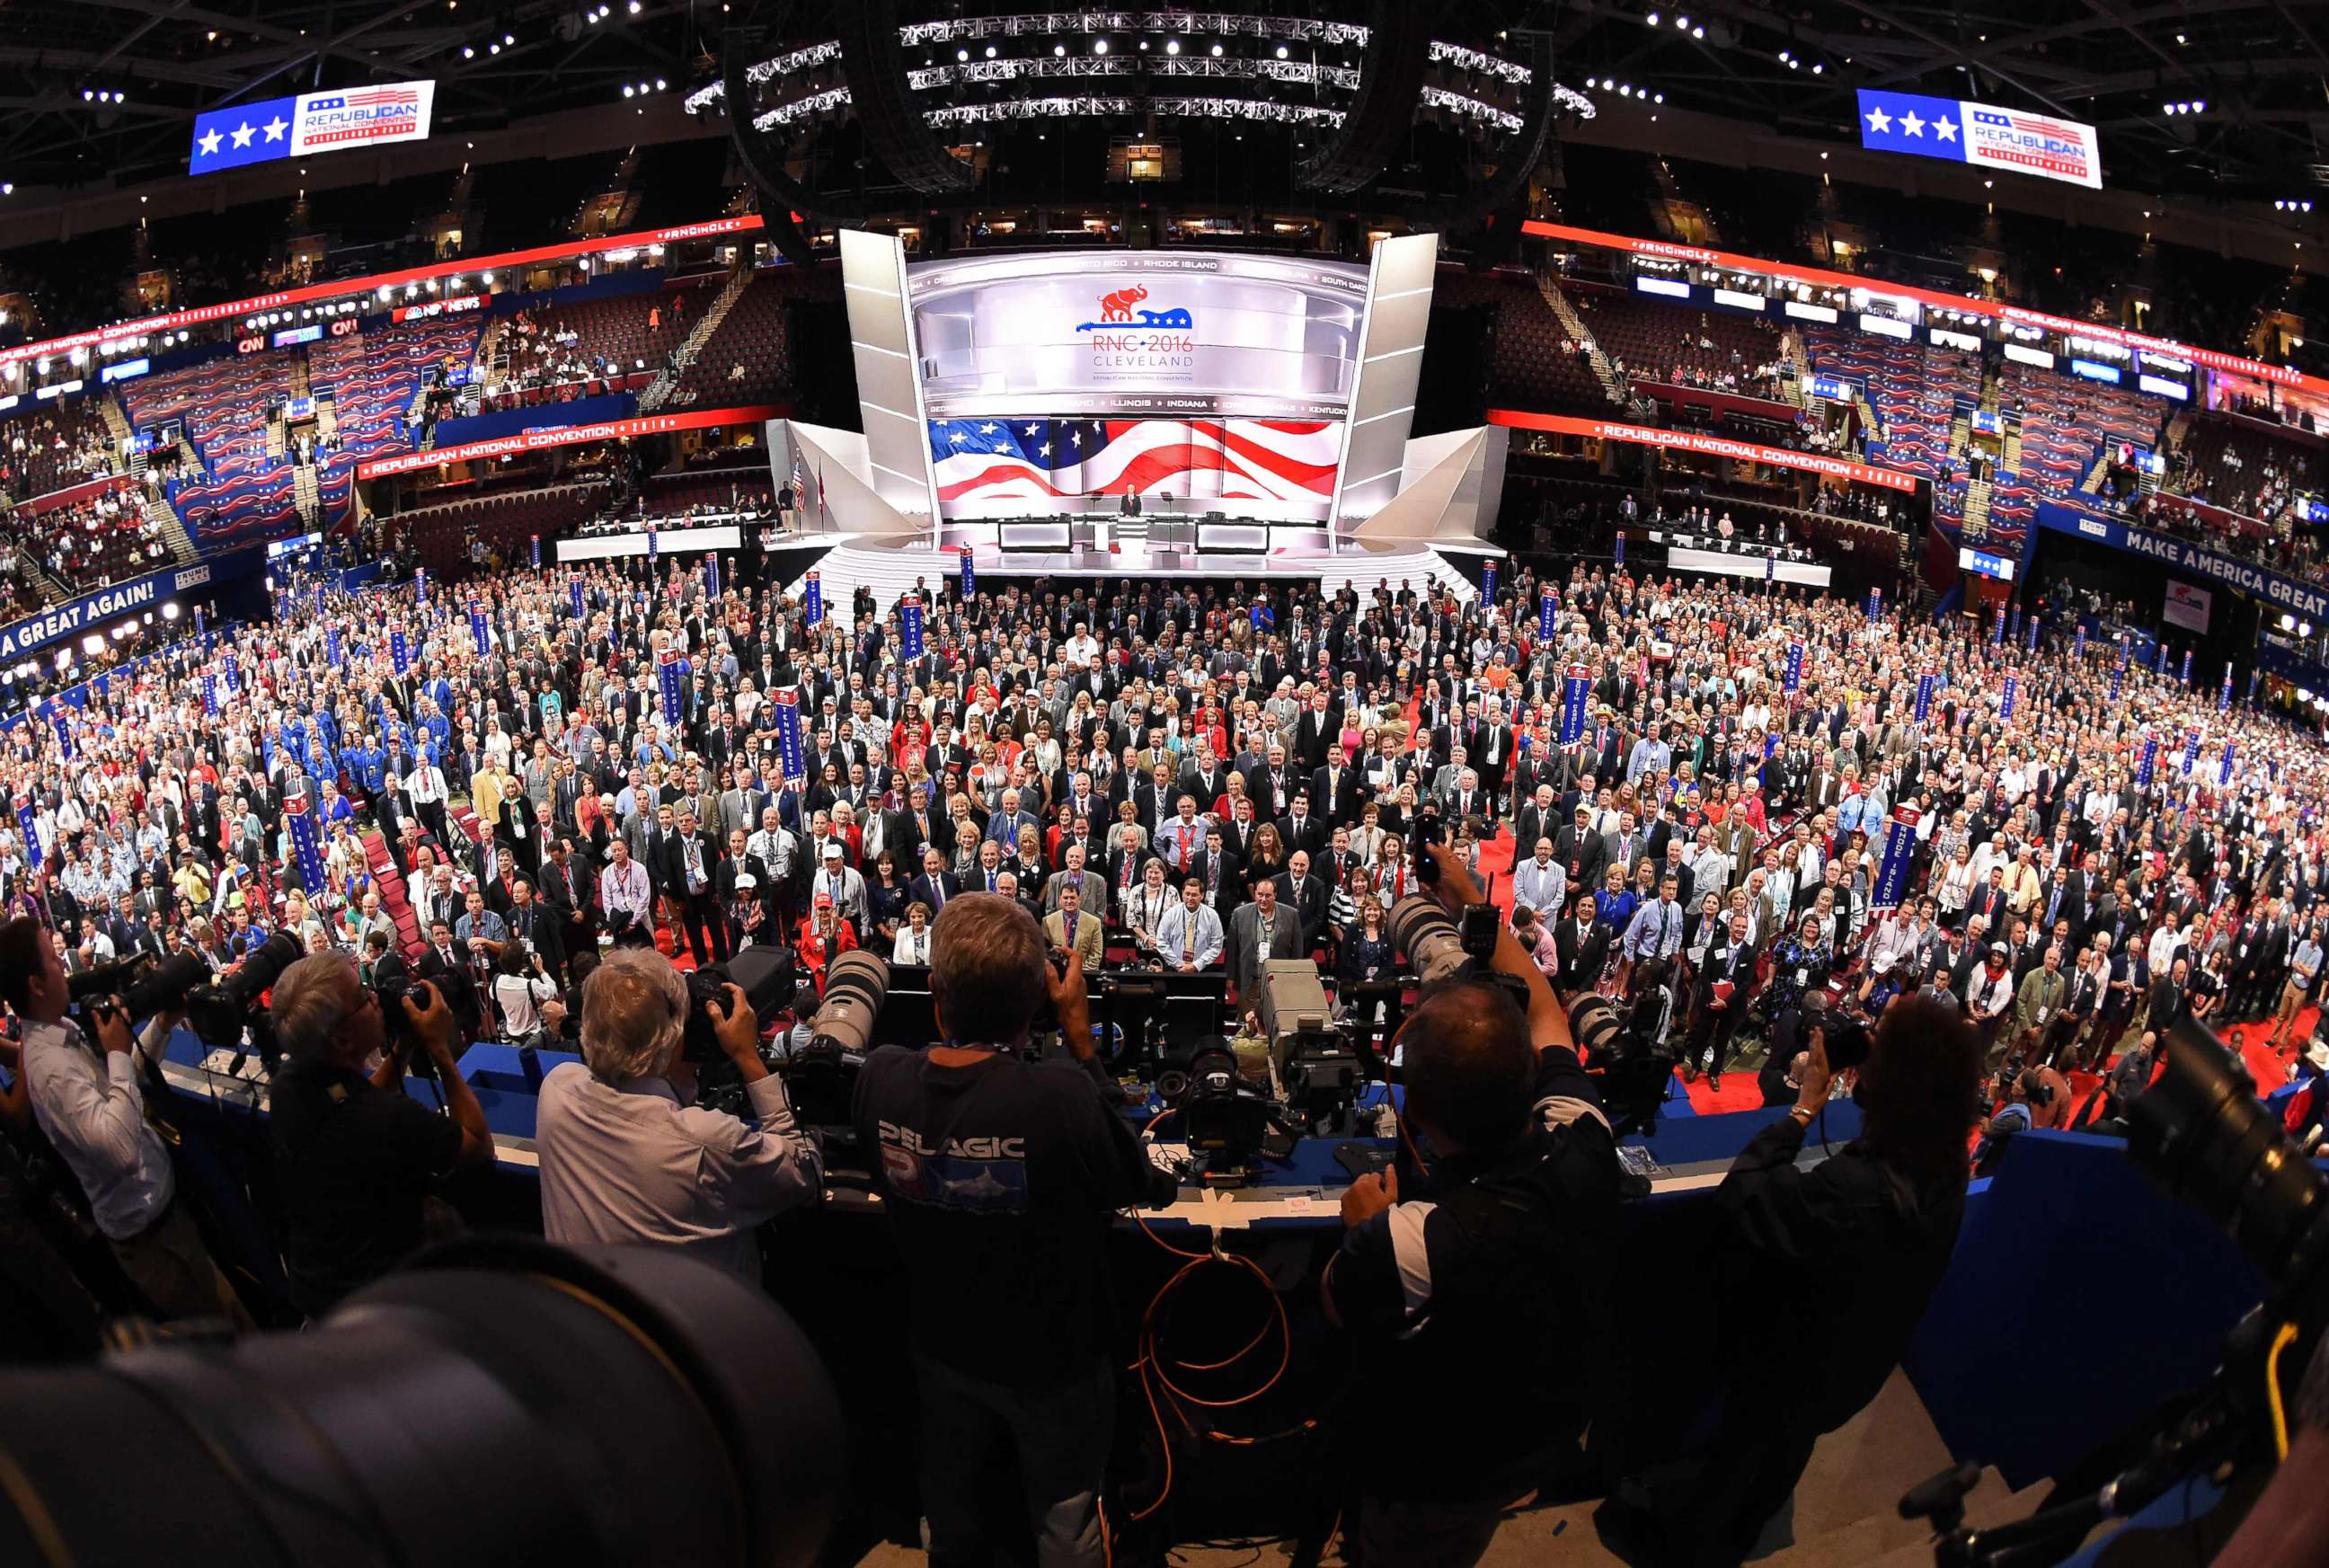 PHOTO: Delegates pose for an official convention photograph on the opening day of the Republican National Convention at the Quicken Loans arena in Cleveland, Ohio, July 18, 2016. 